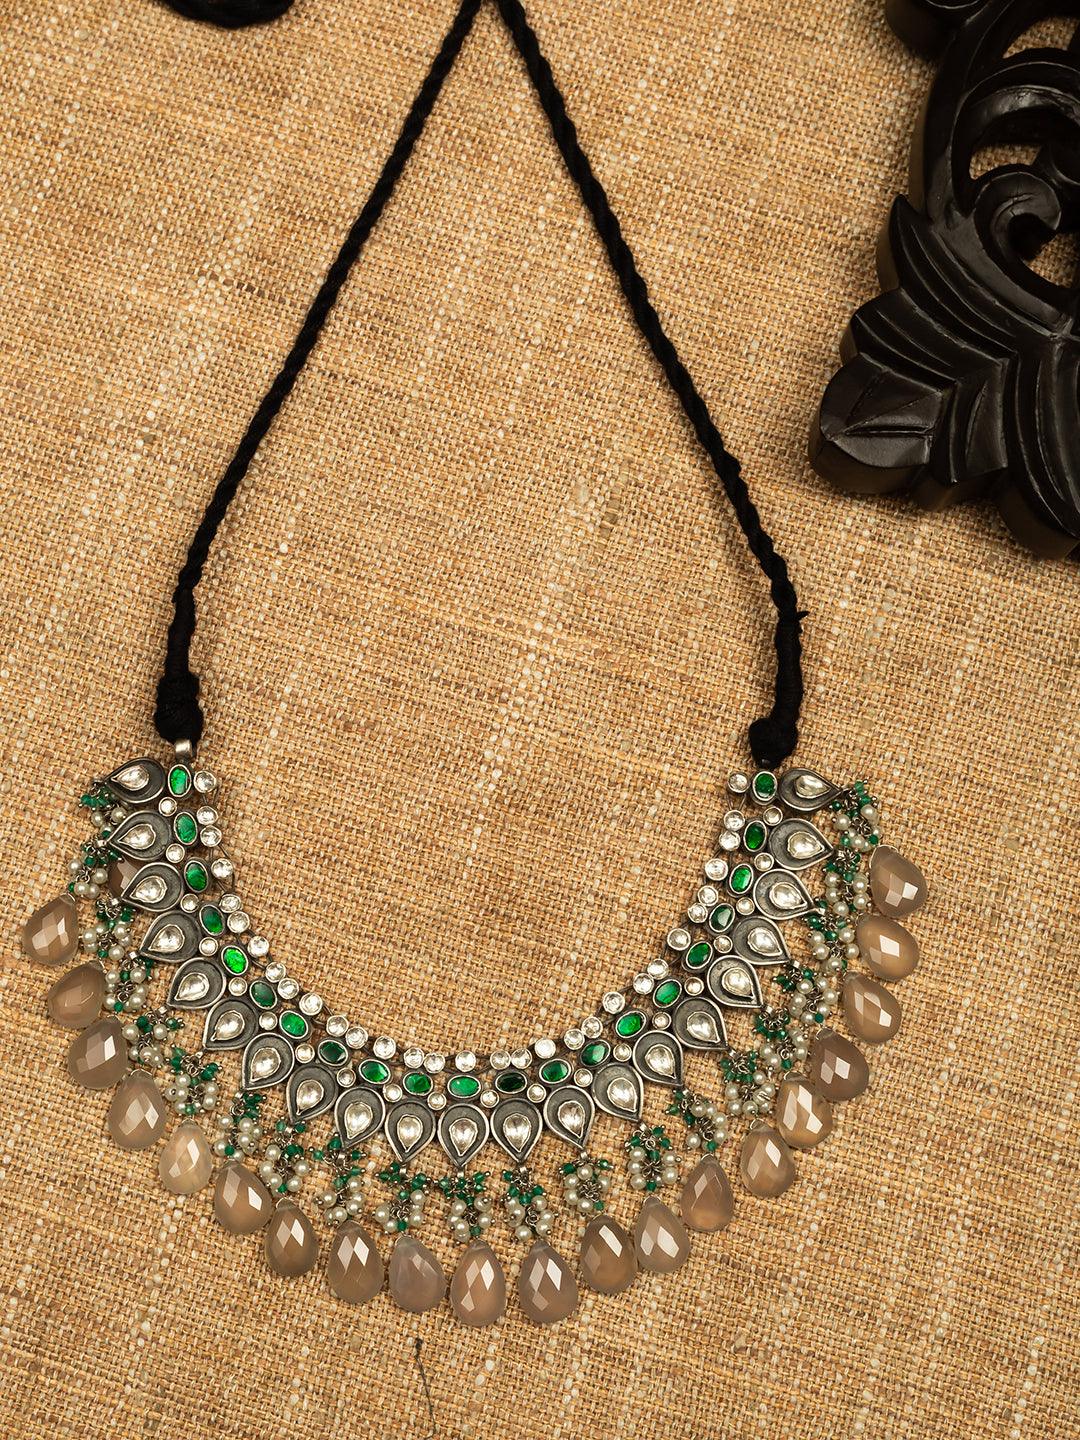 The Ageate Dribble Necklace - Curio Cottage 